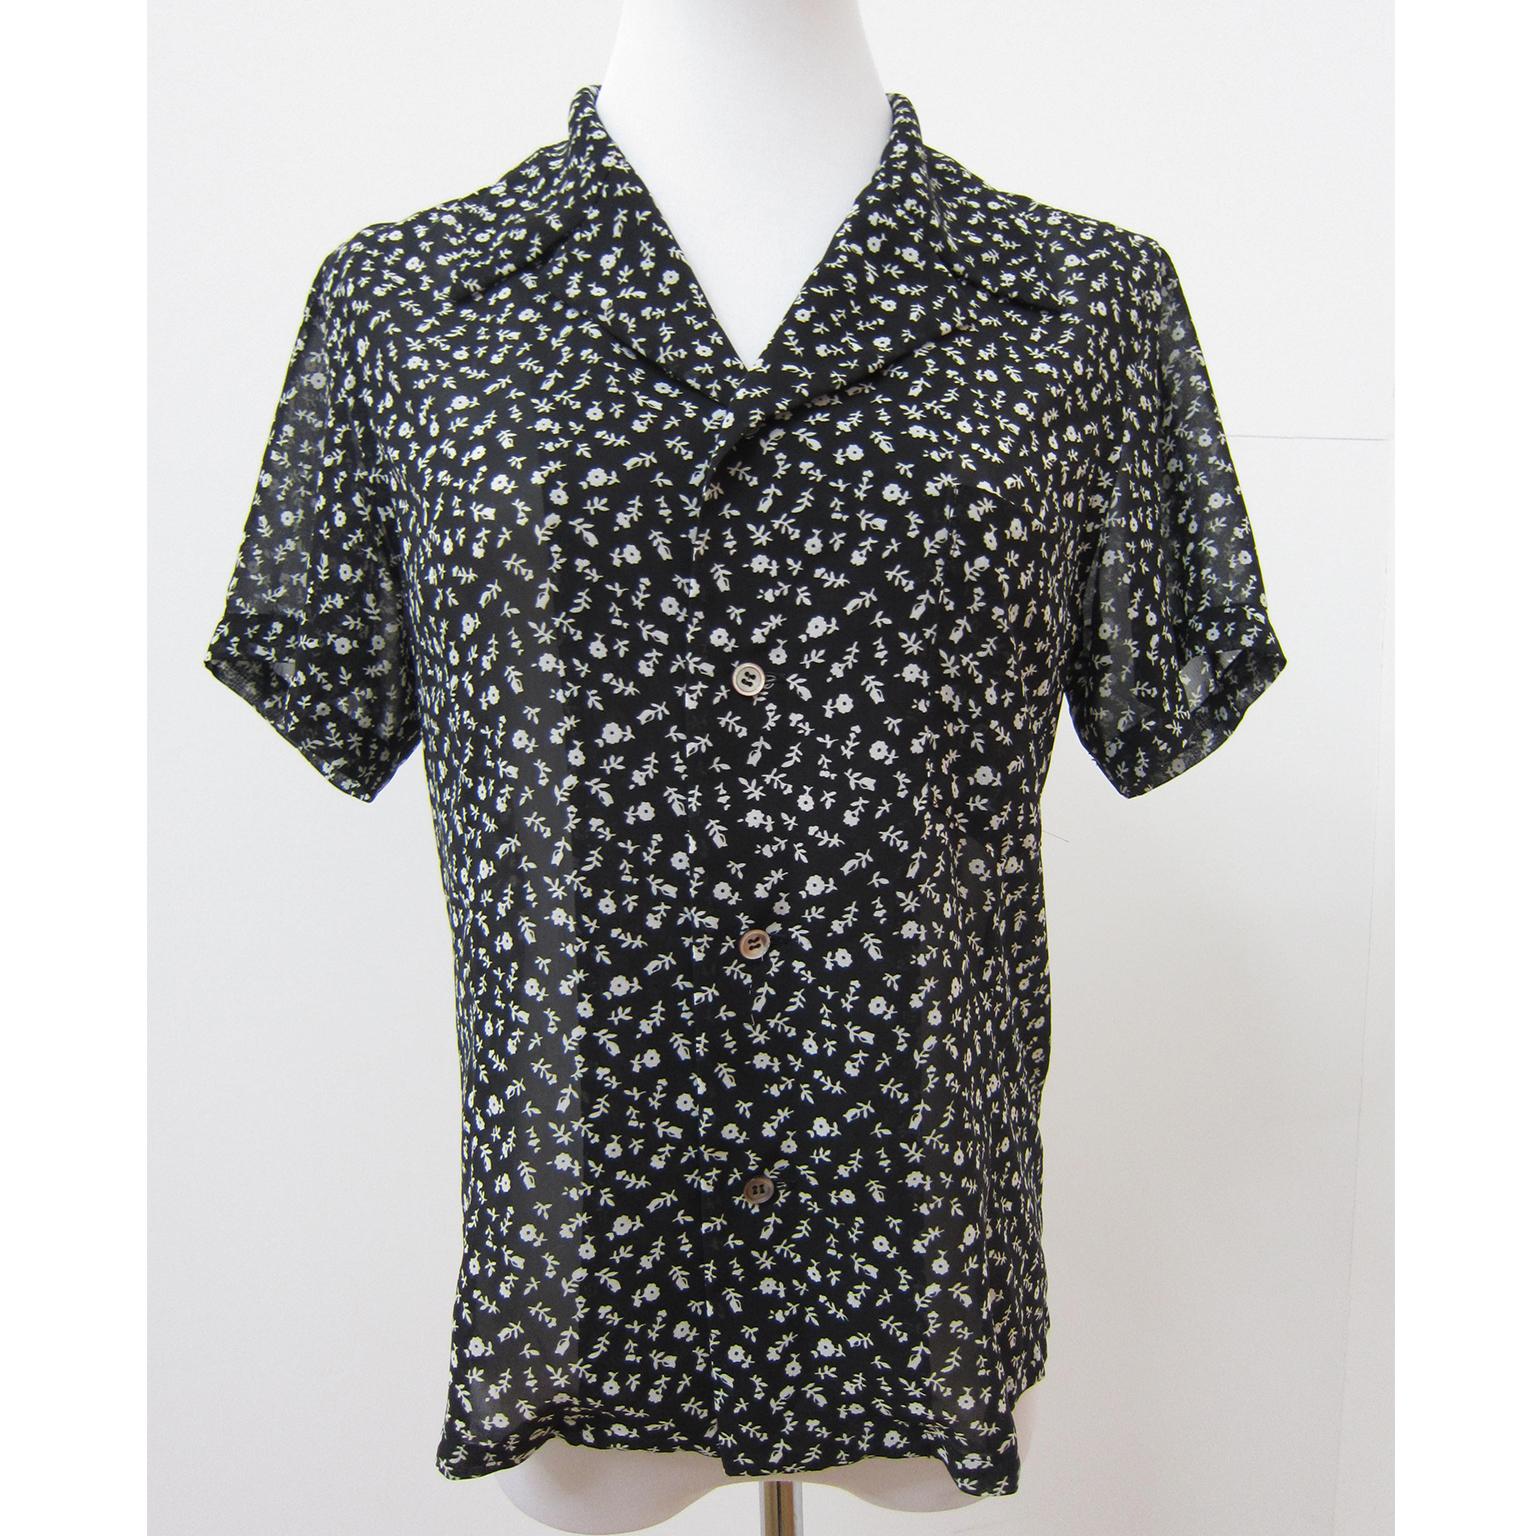 Comme des Garcons floral Blouse AD 2001. Black and white ditsy print. Short length sleeves, little V neck with collar and front button closure. Unlined. 
Measurements ;
Shoulder : ca. 41 cm
Sleeve 18 cm
Length : 56 cm
Under arm : 46 cm
